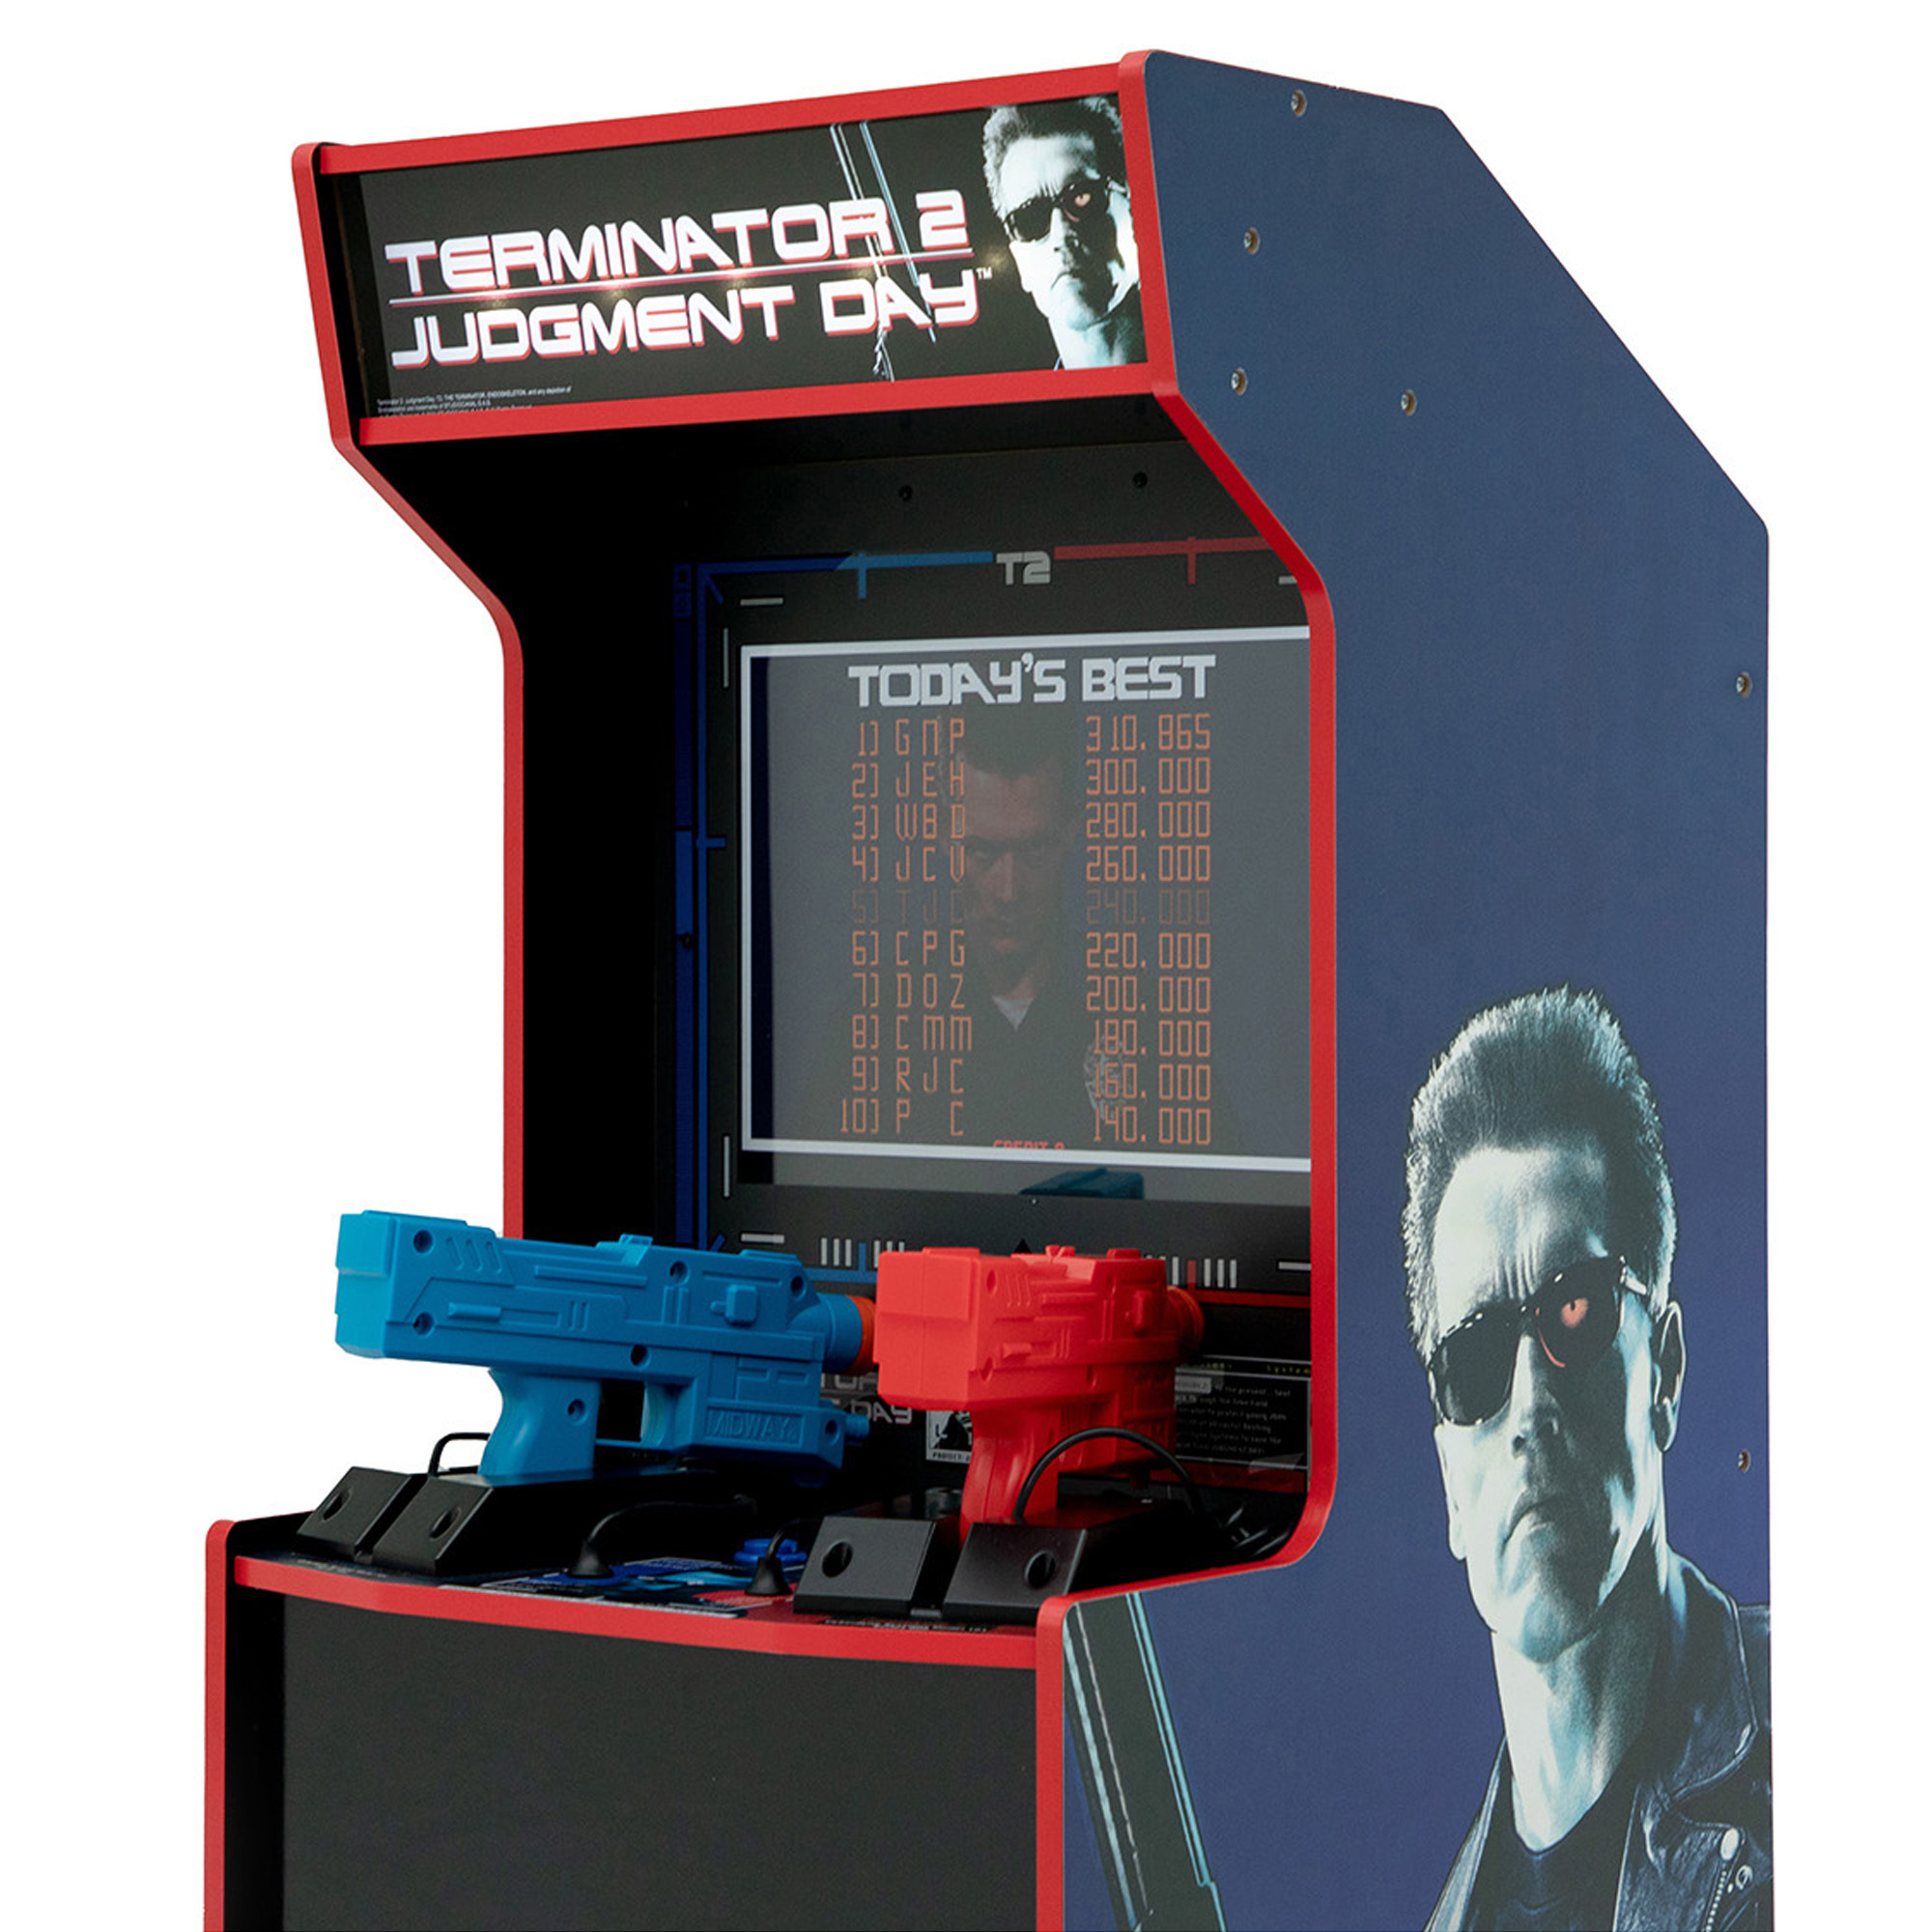 Arcade1Up - Terminator 2: Judgment Day With Riser and Lit Marquee, Arcade Game Machine - image 1 of 13